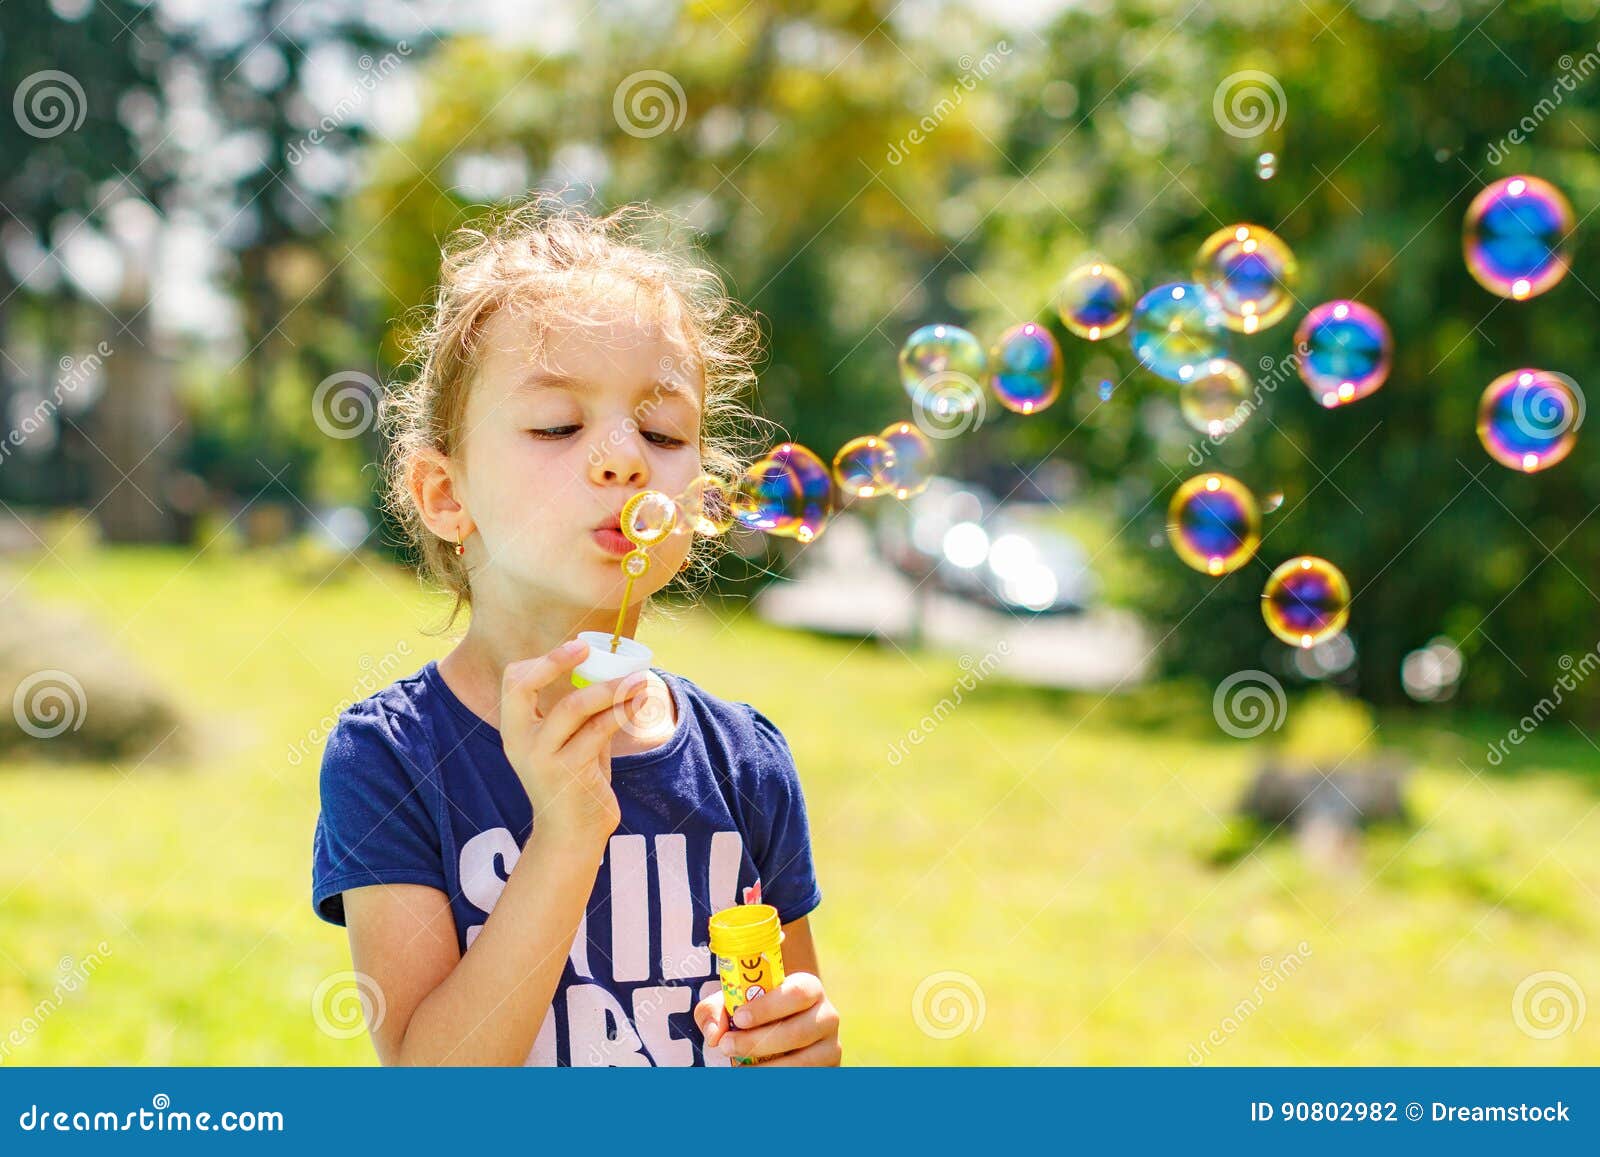 a little girl blowing soap bubbles in summer park.